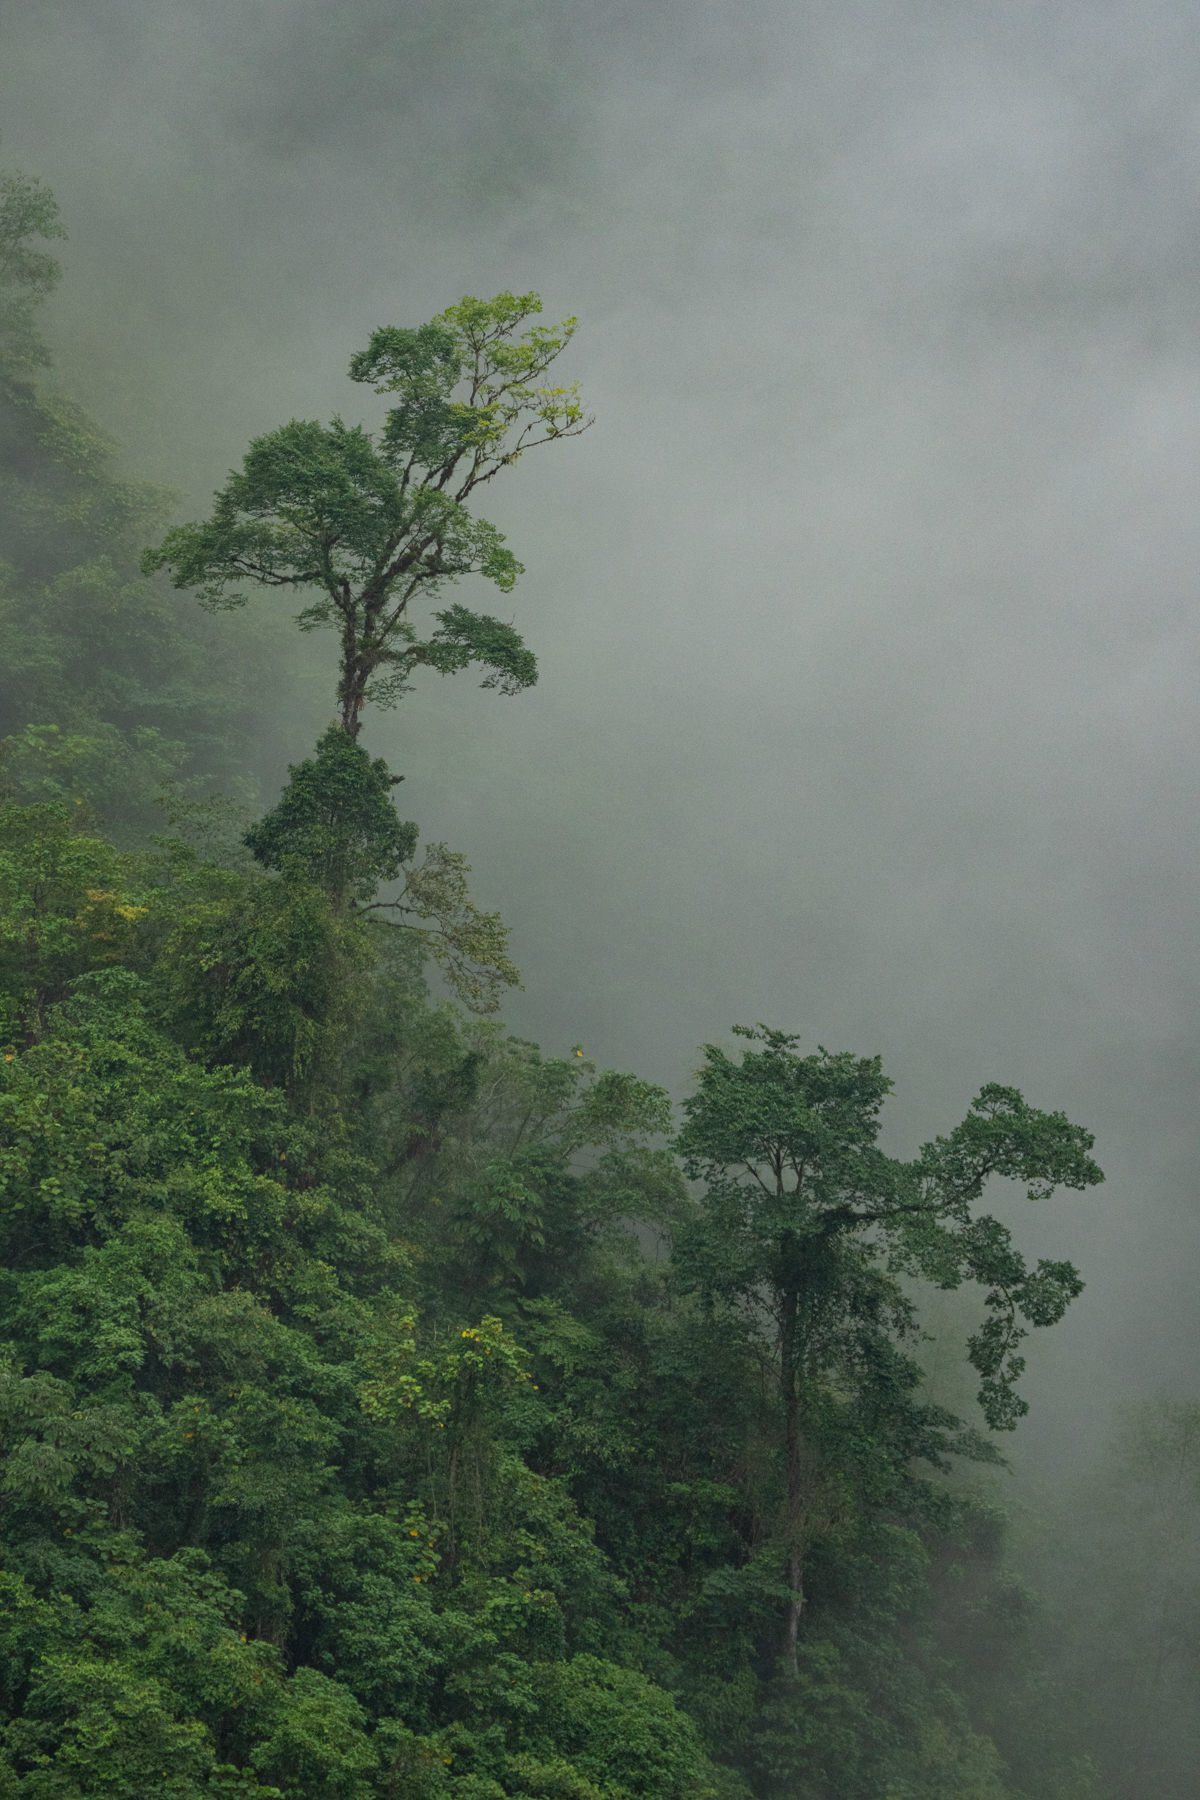 Trees pierce the mist of Costa Rica's rainforests (image by Inger Vandyke)